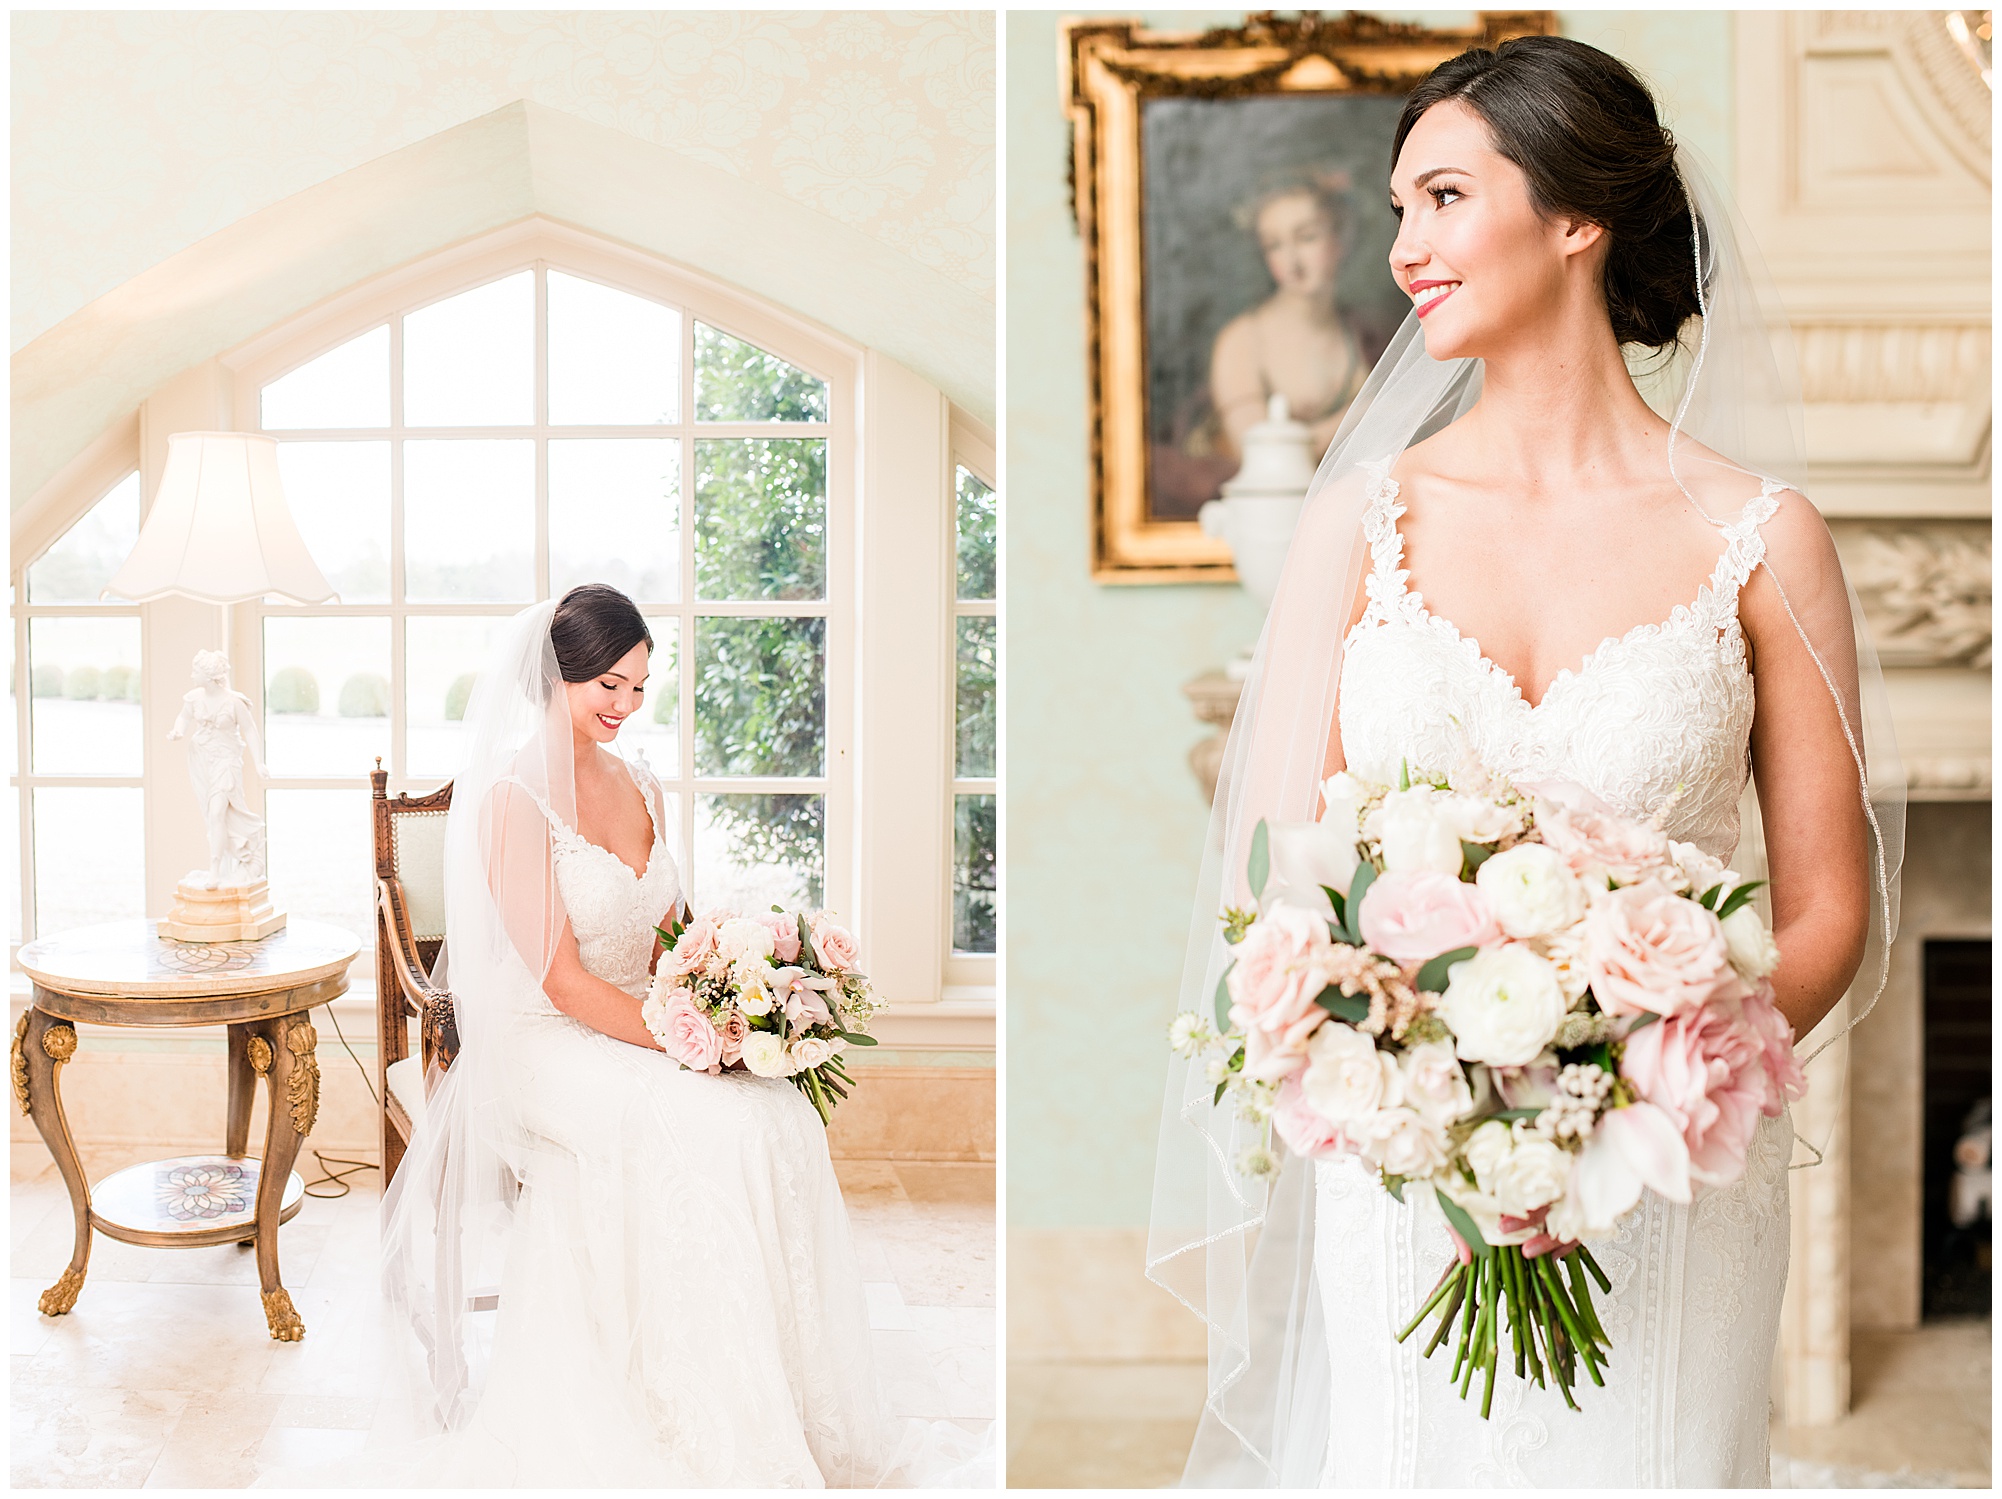 classic timeless bridal portrait at dover hall. by richmond rva wedding photographer, sarah & dave photography. winter. january. fairytale wedding. disney inspired theme.